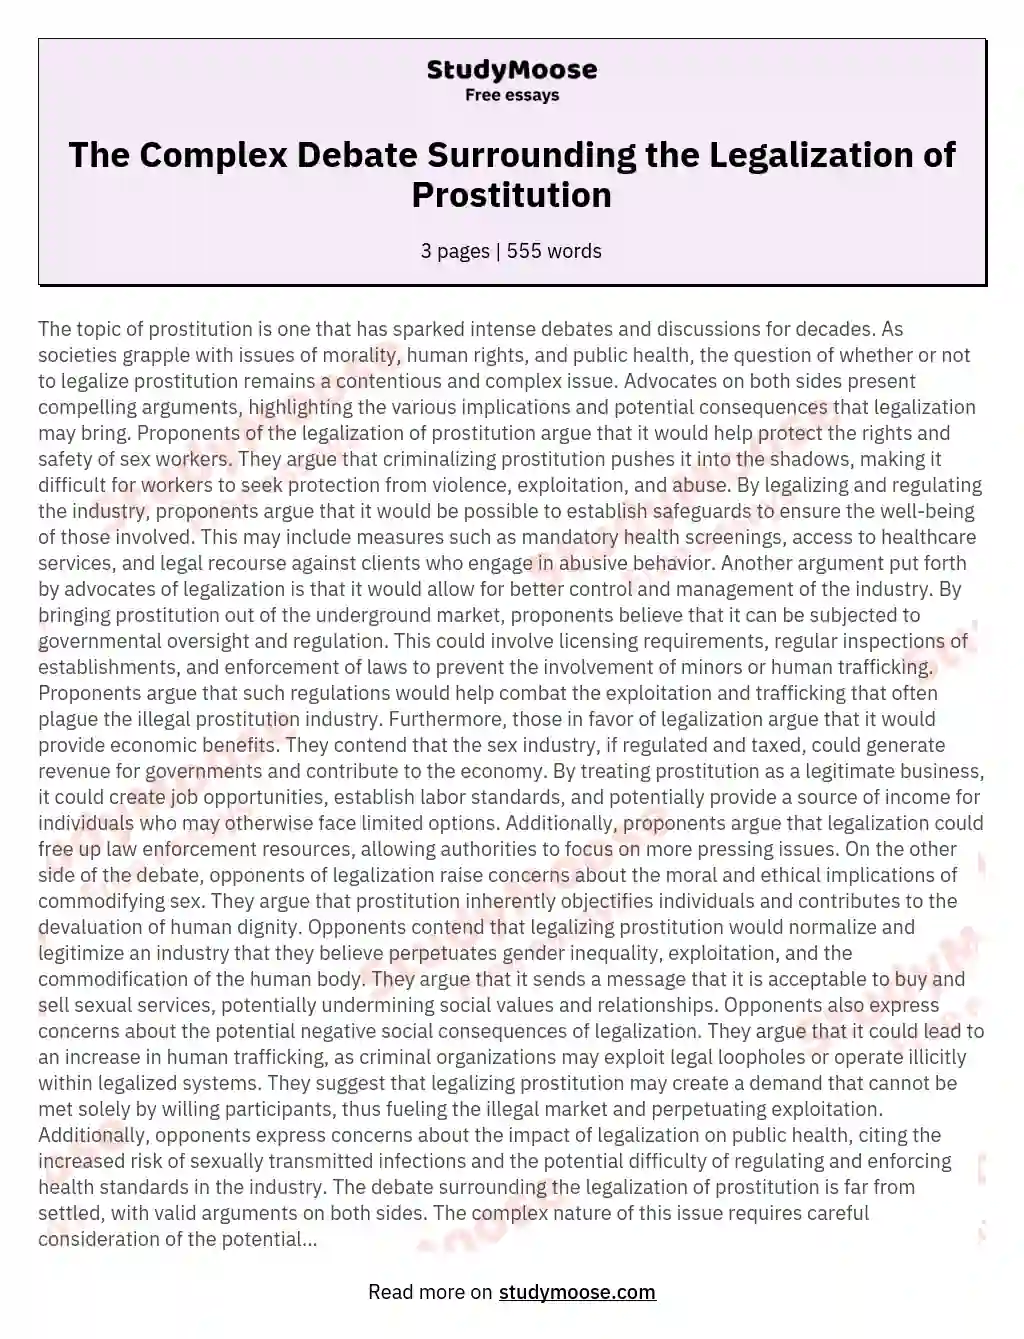 The Complex Debate Surrounding the Legalization of Prostitution essay